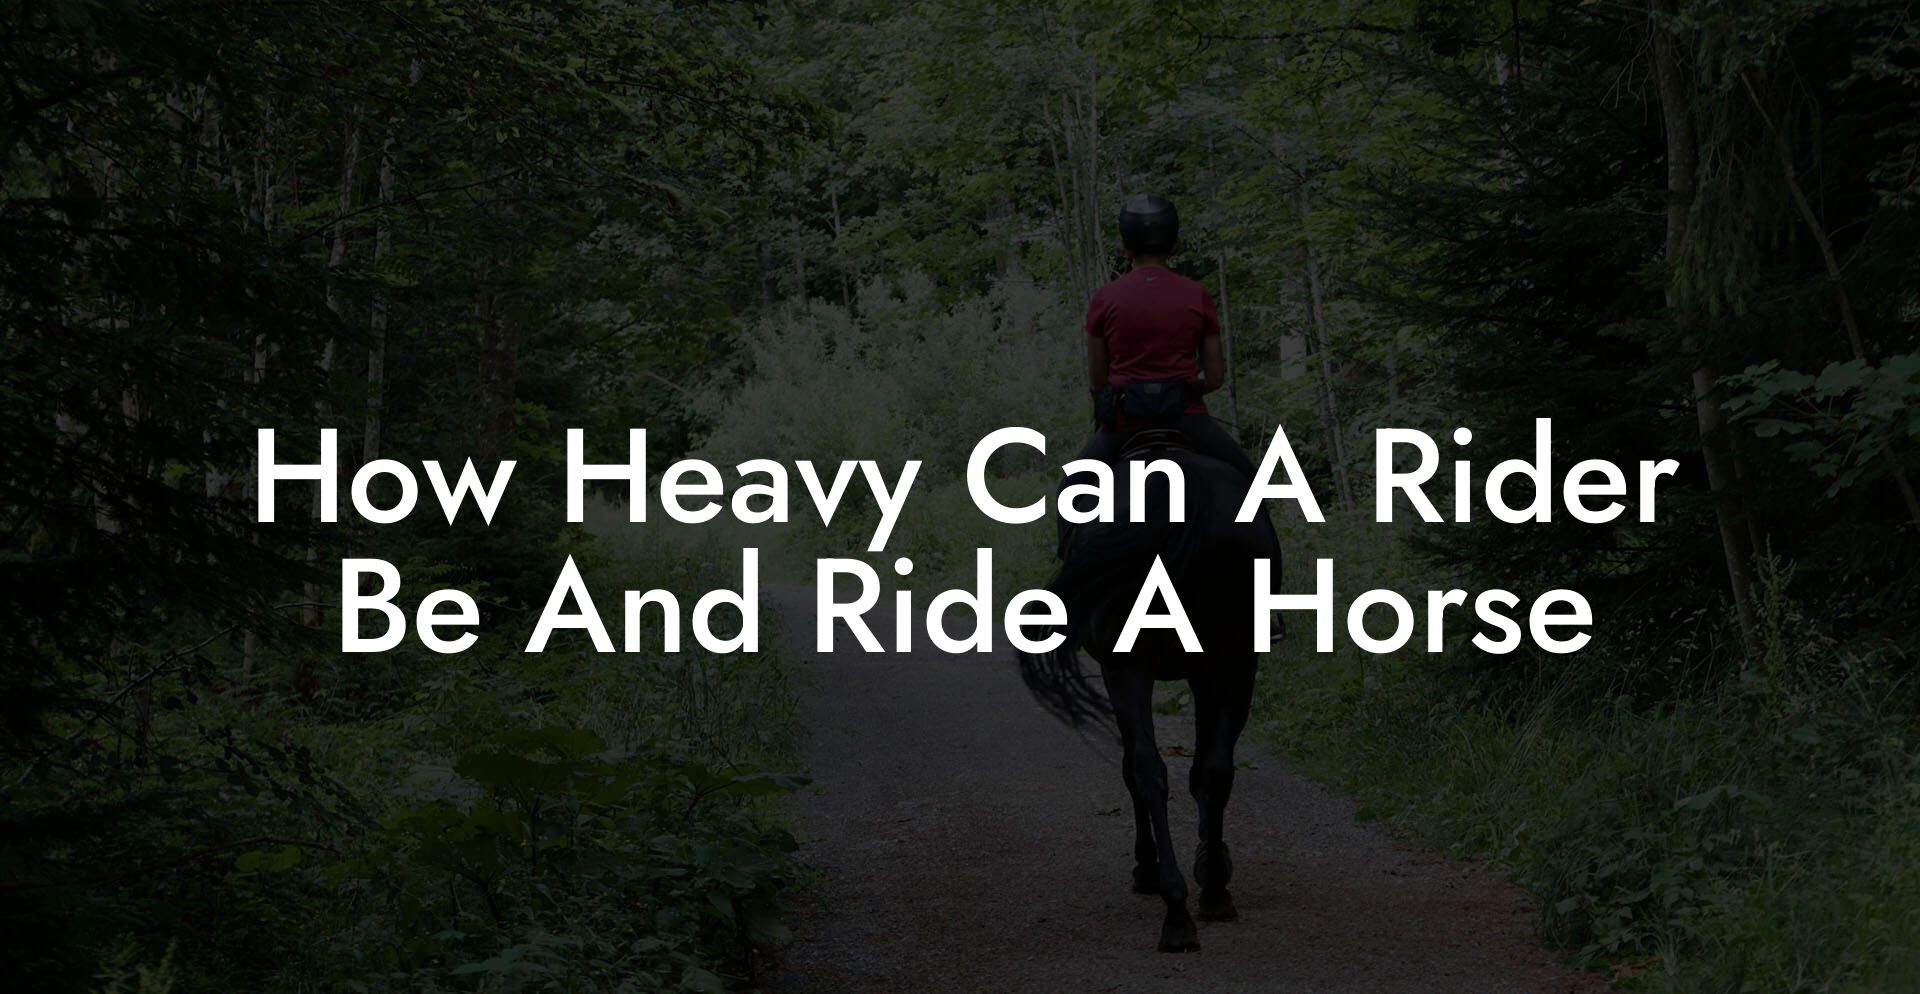 How Heavy Can A Rider Be And Ride A Horse